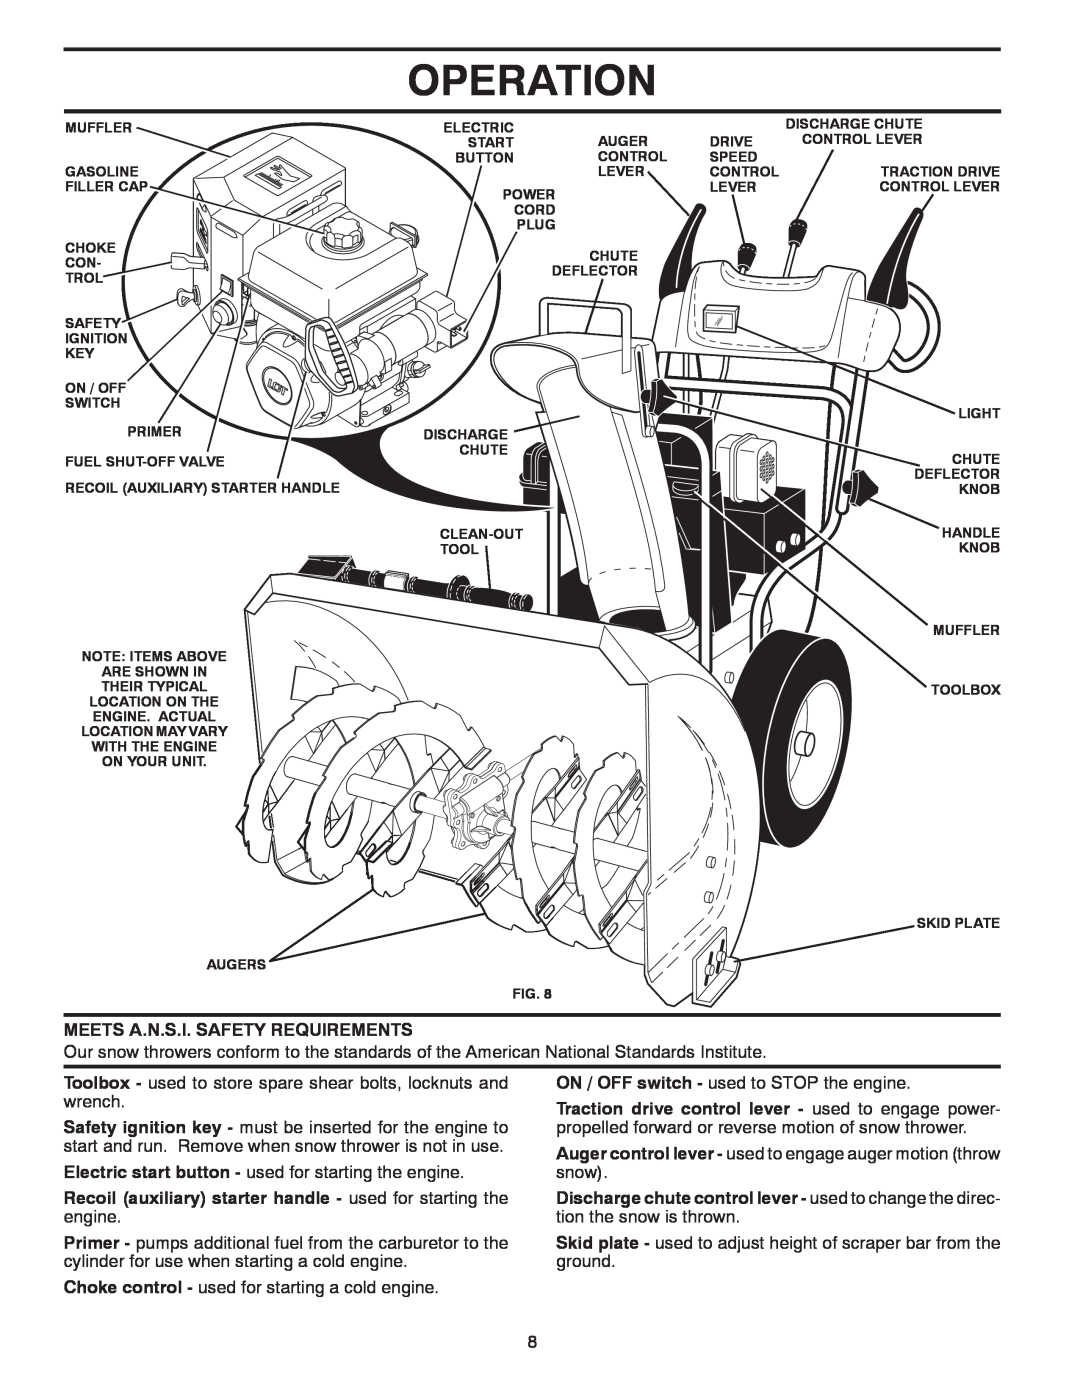 Poulan 437920, 96192004501 owner manual Operation, Meets A.N.S.I. Safety Requirements 